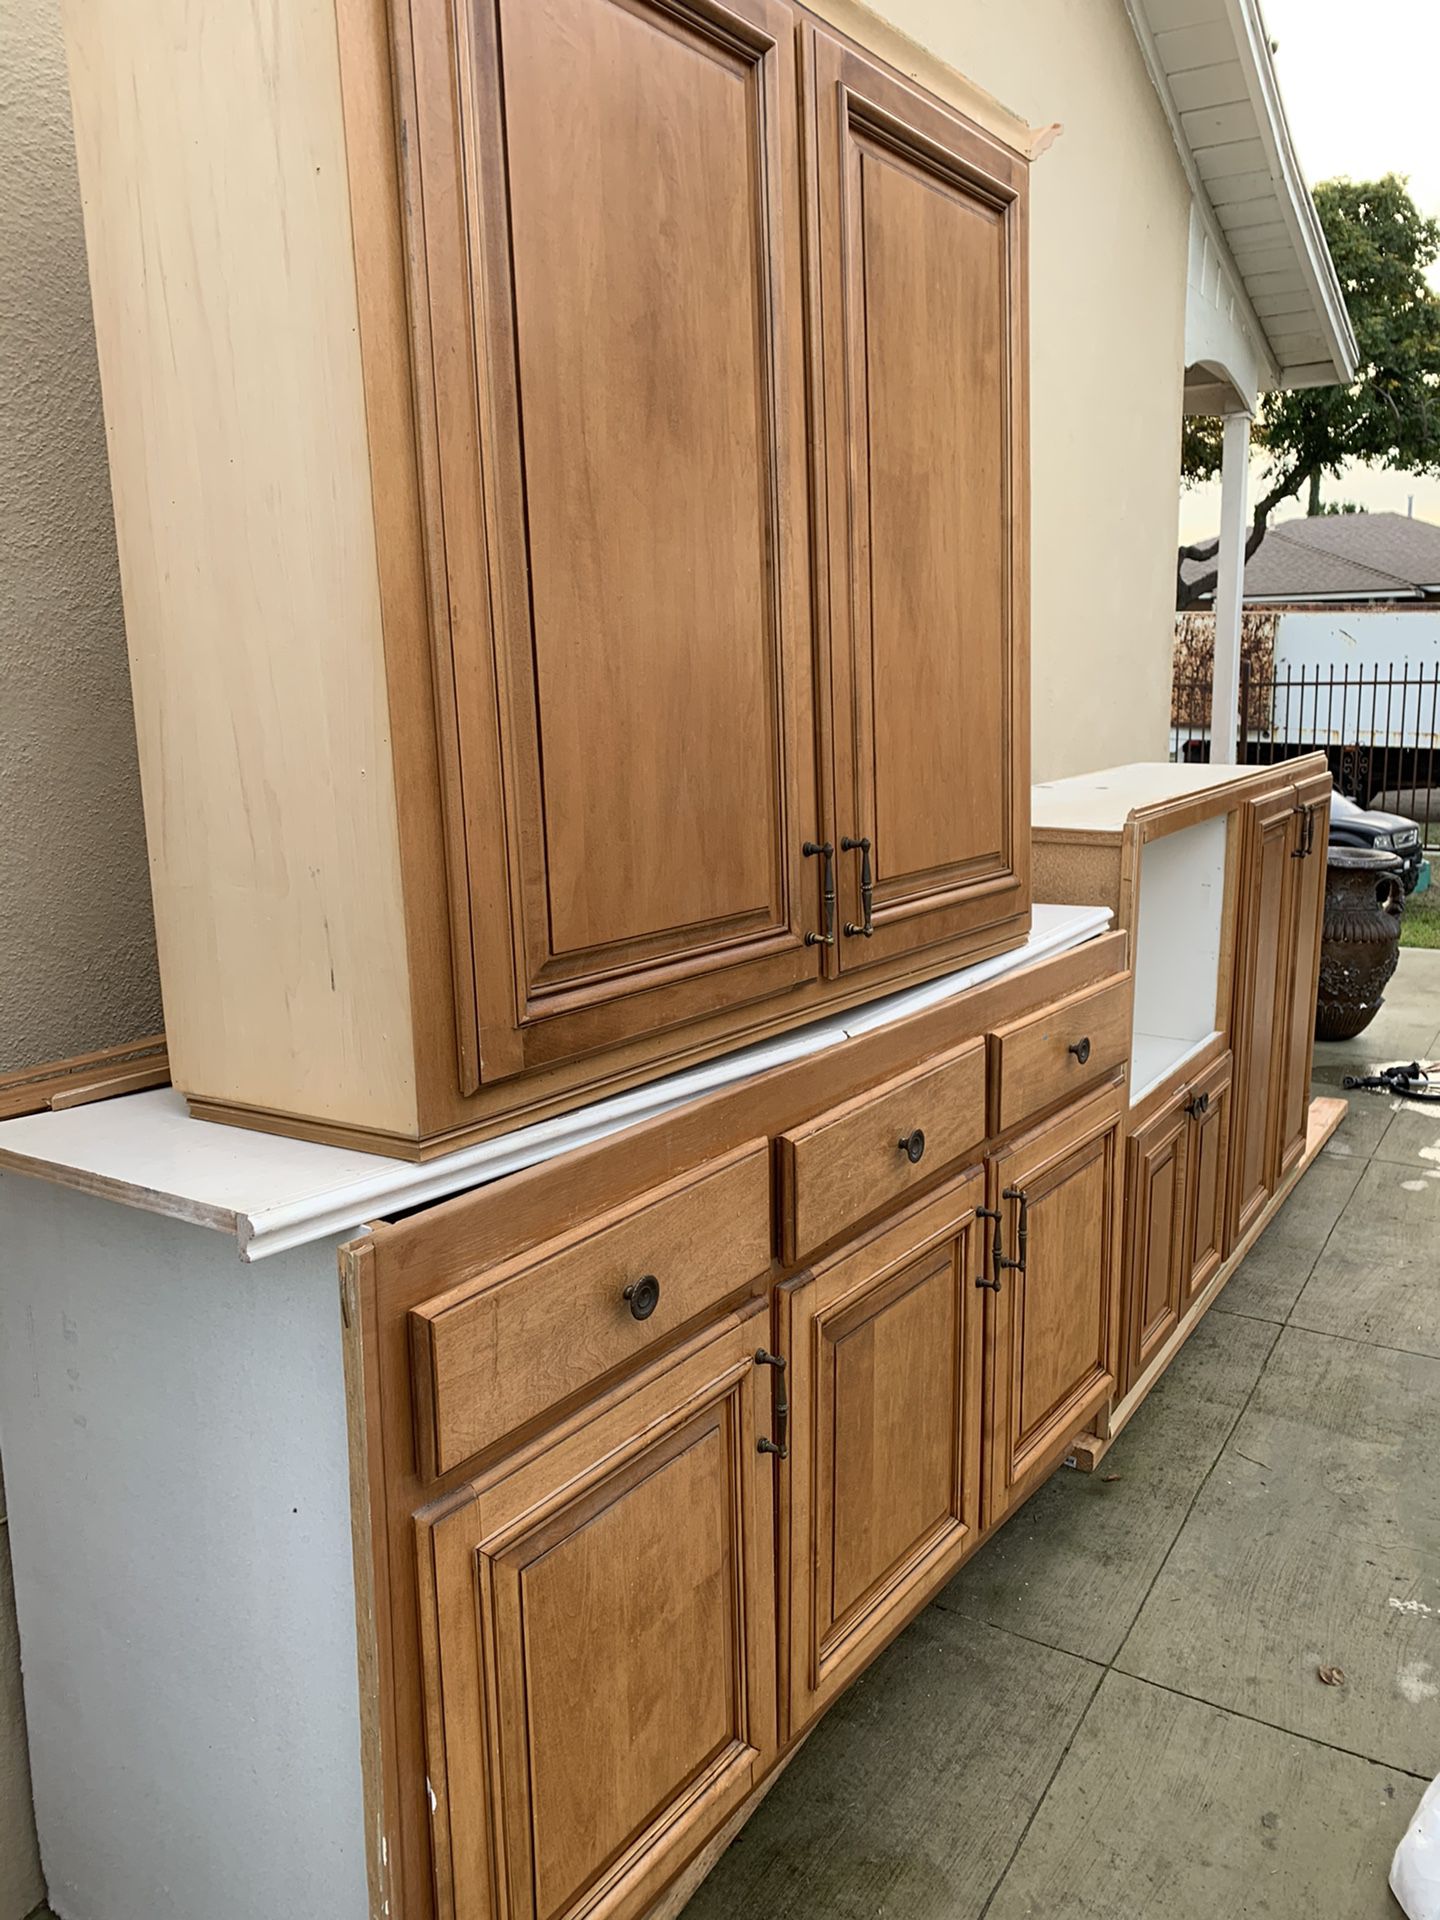 Kitchen cabinets $ 150 for all